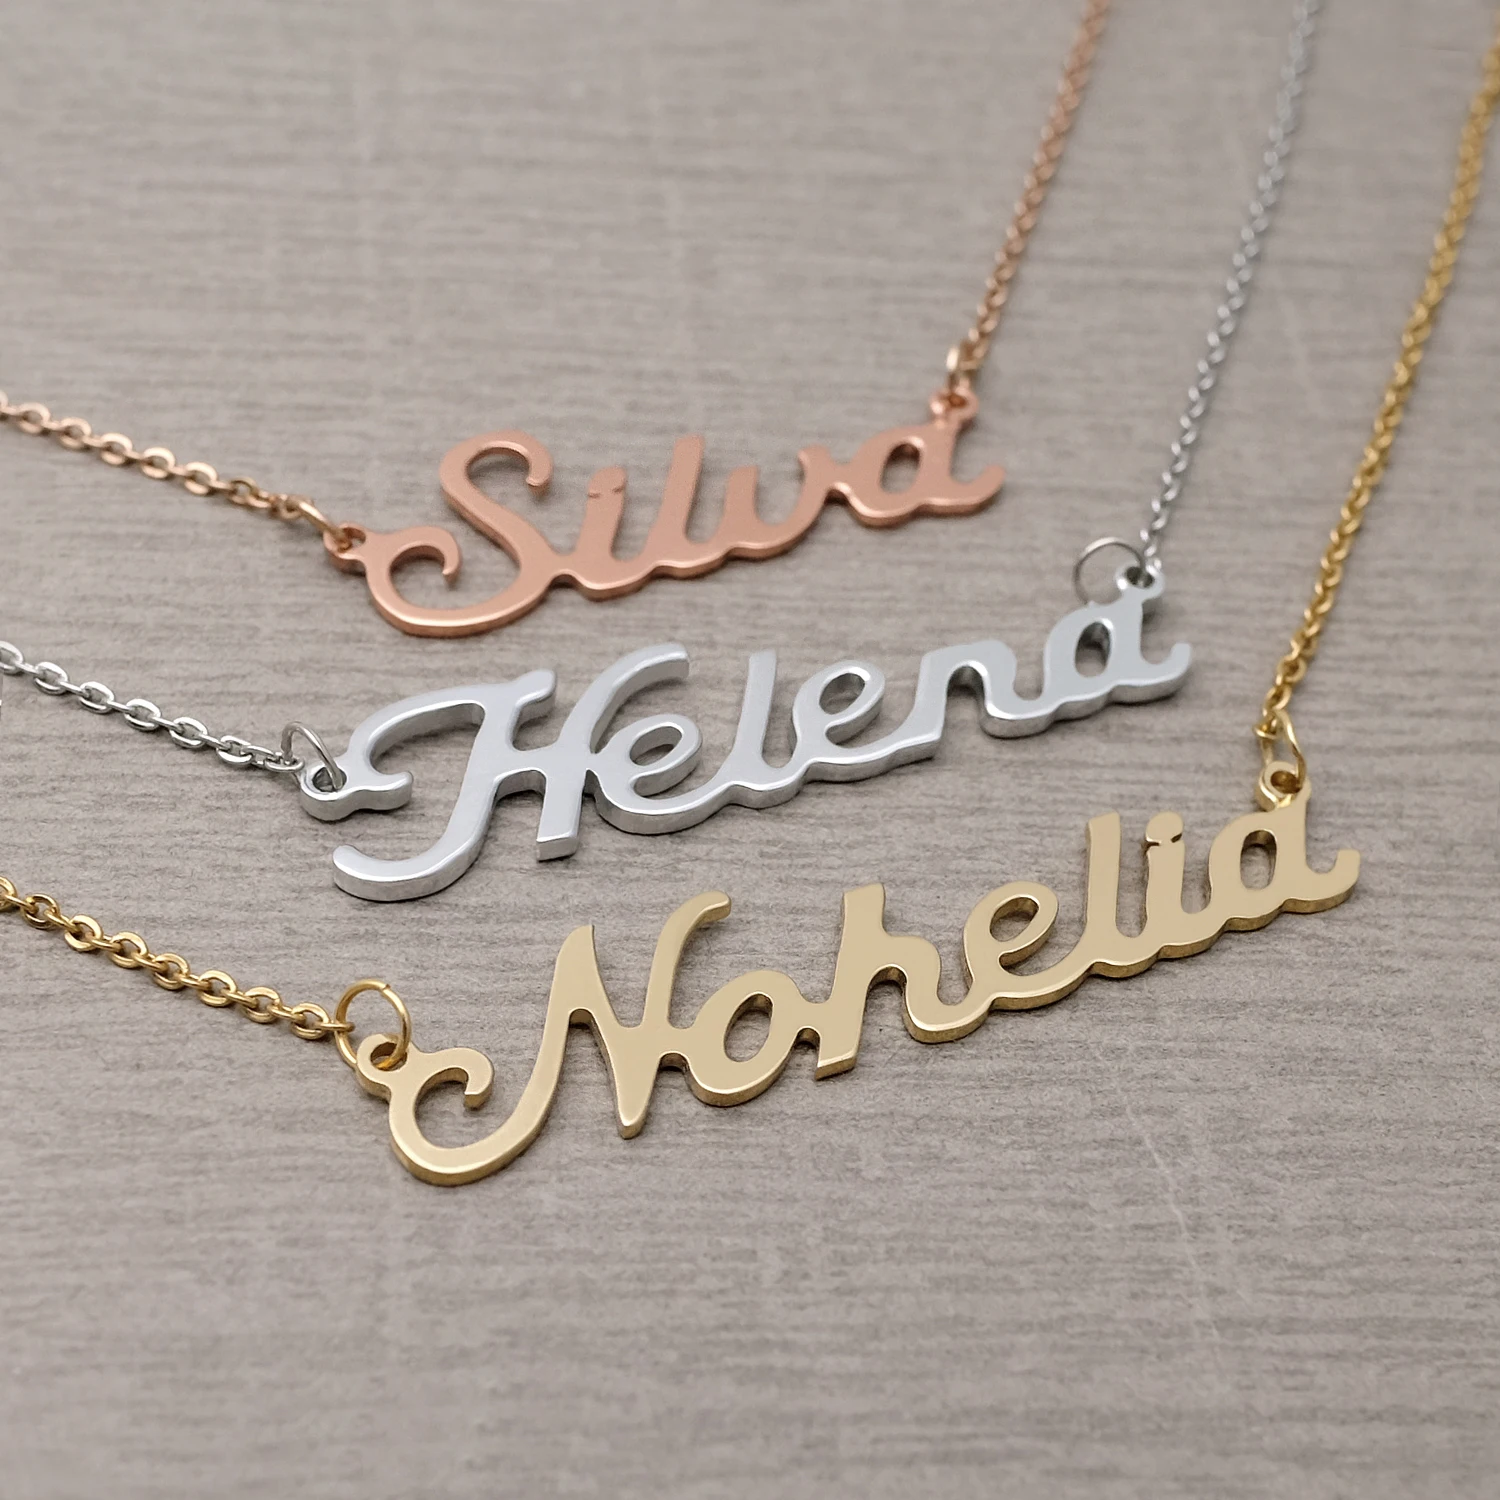 

Customized Name Necklace Personalized Name Necklace Custom Jewelry Women Letter Choker Pendant Nameplate Gift for Her Girlfriend